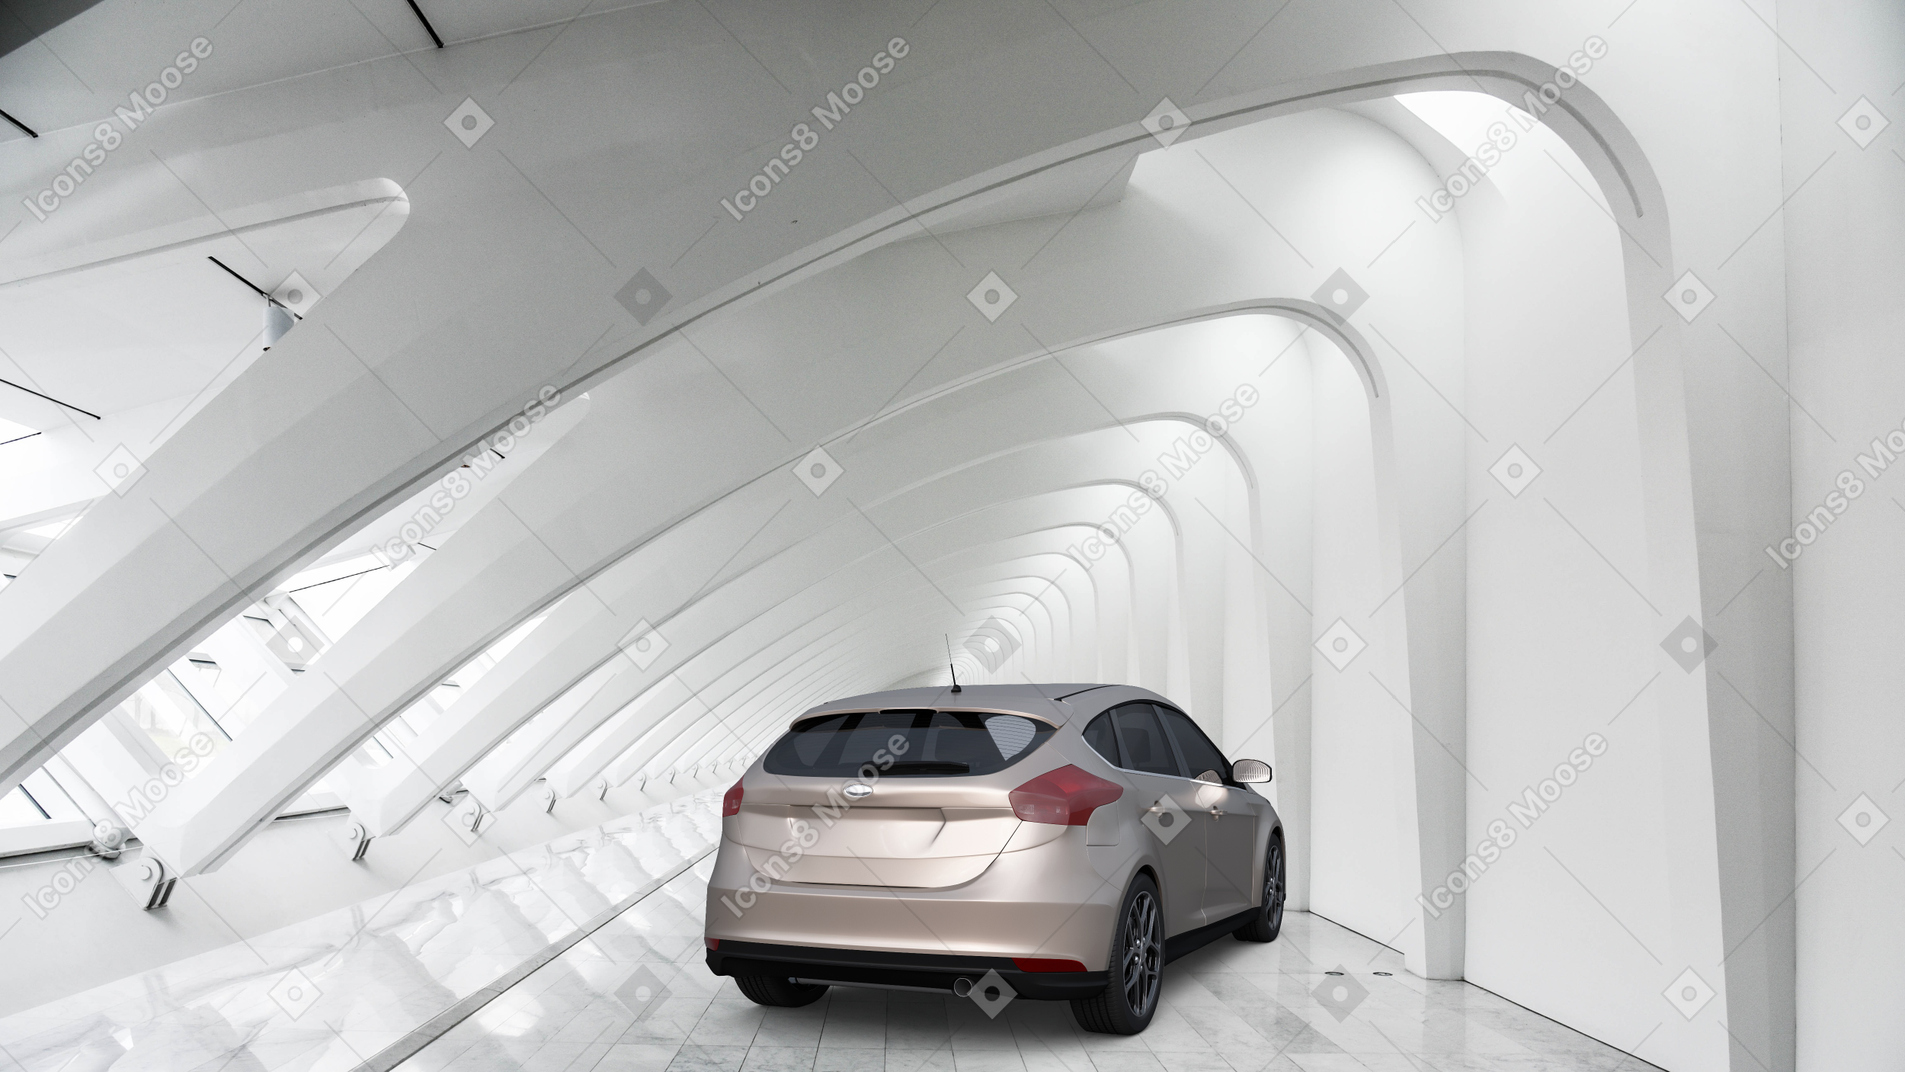 A silver car is parked in a tunnel